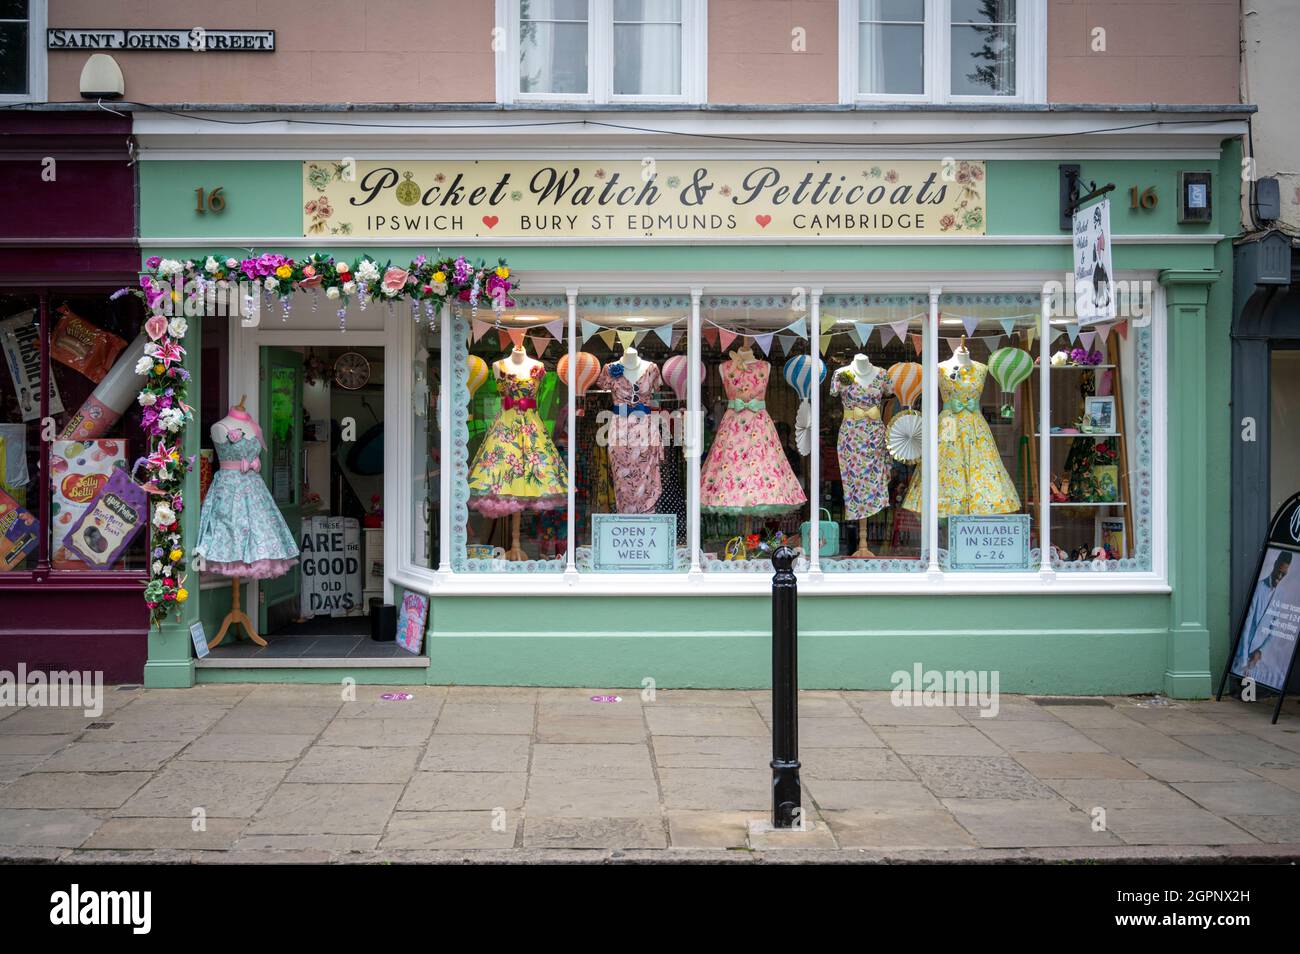 The shop window of Pocket Watch and Petticoats vintage style clothes shop  Cambridge UK Stock Photo - Alamy